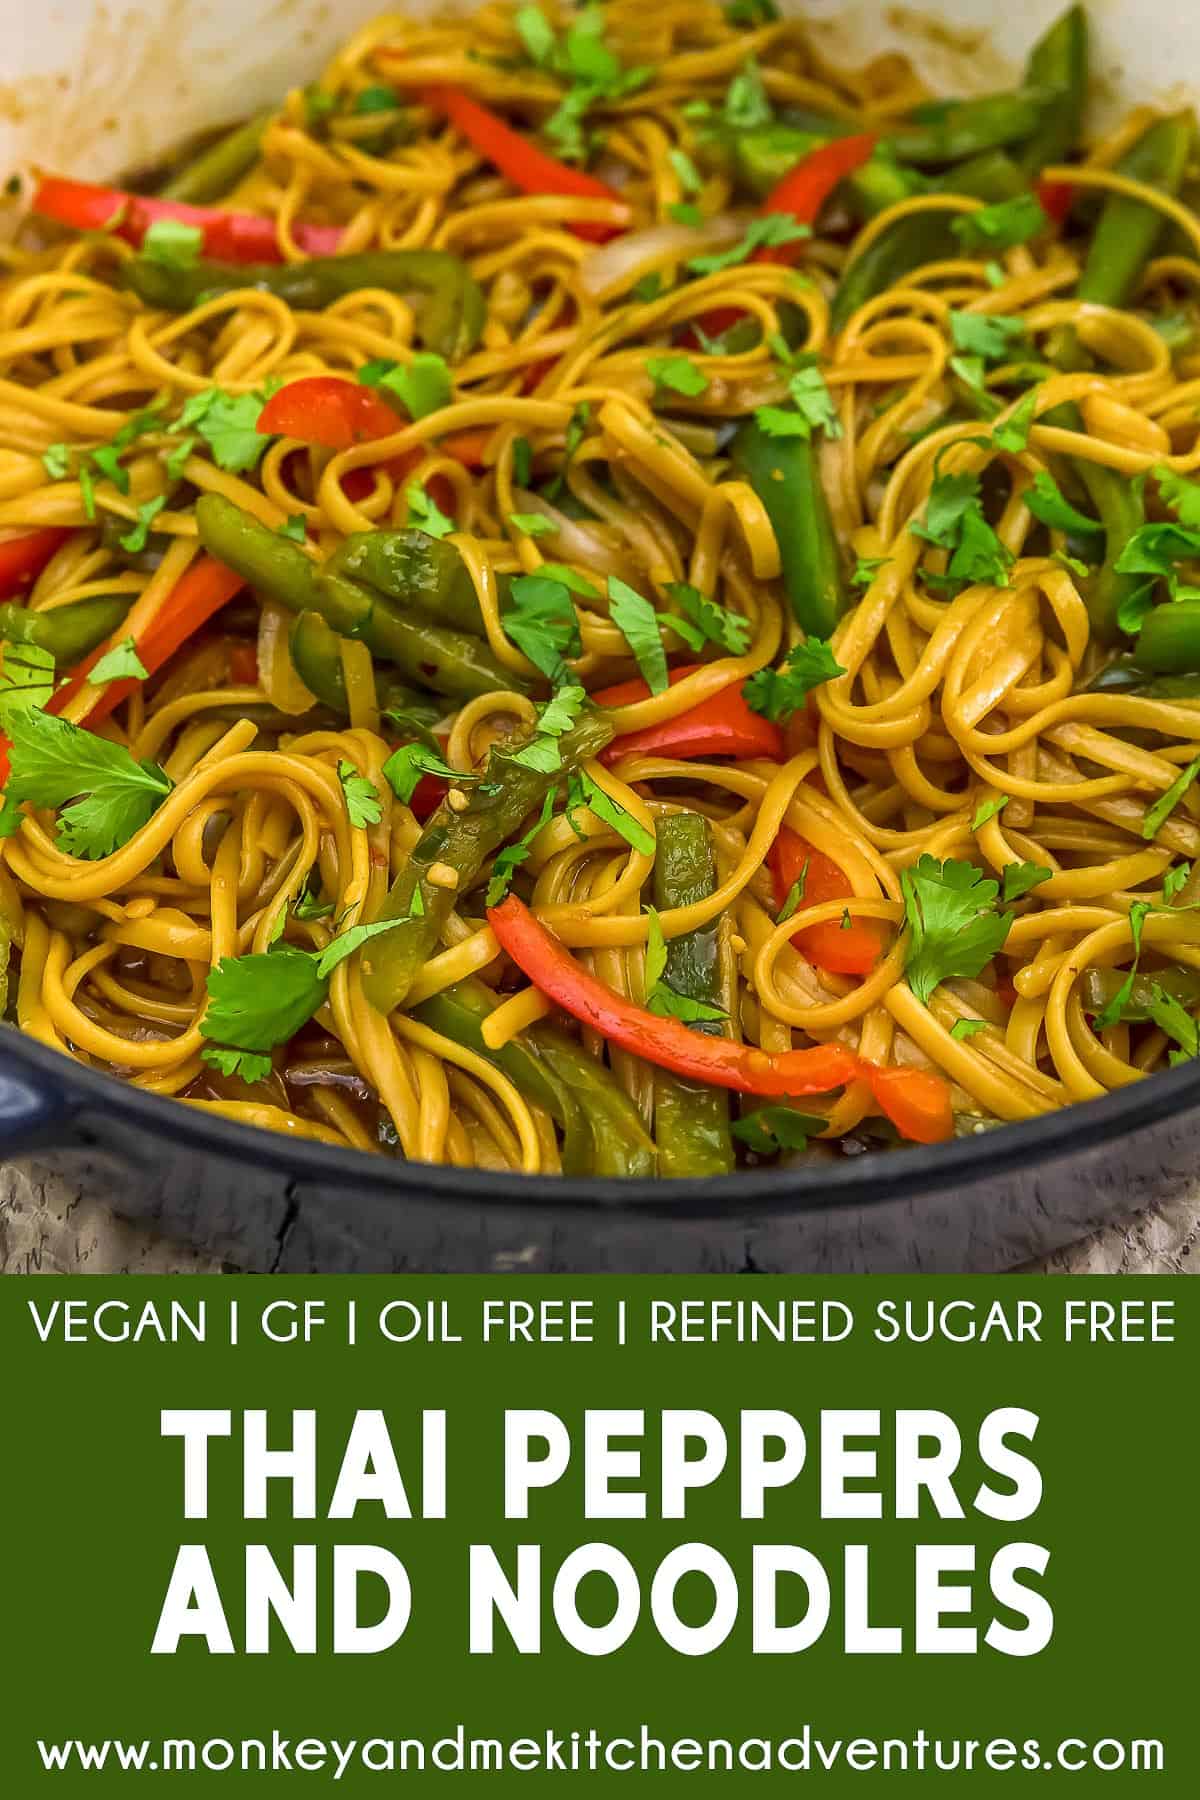 Thai Peppers and Noodles with Text Description